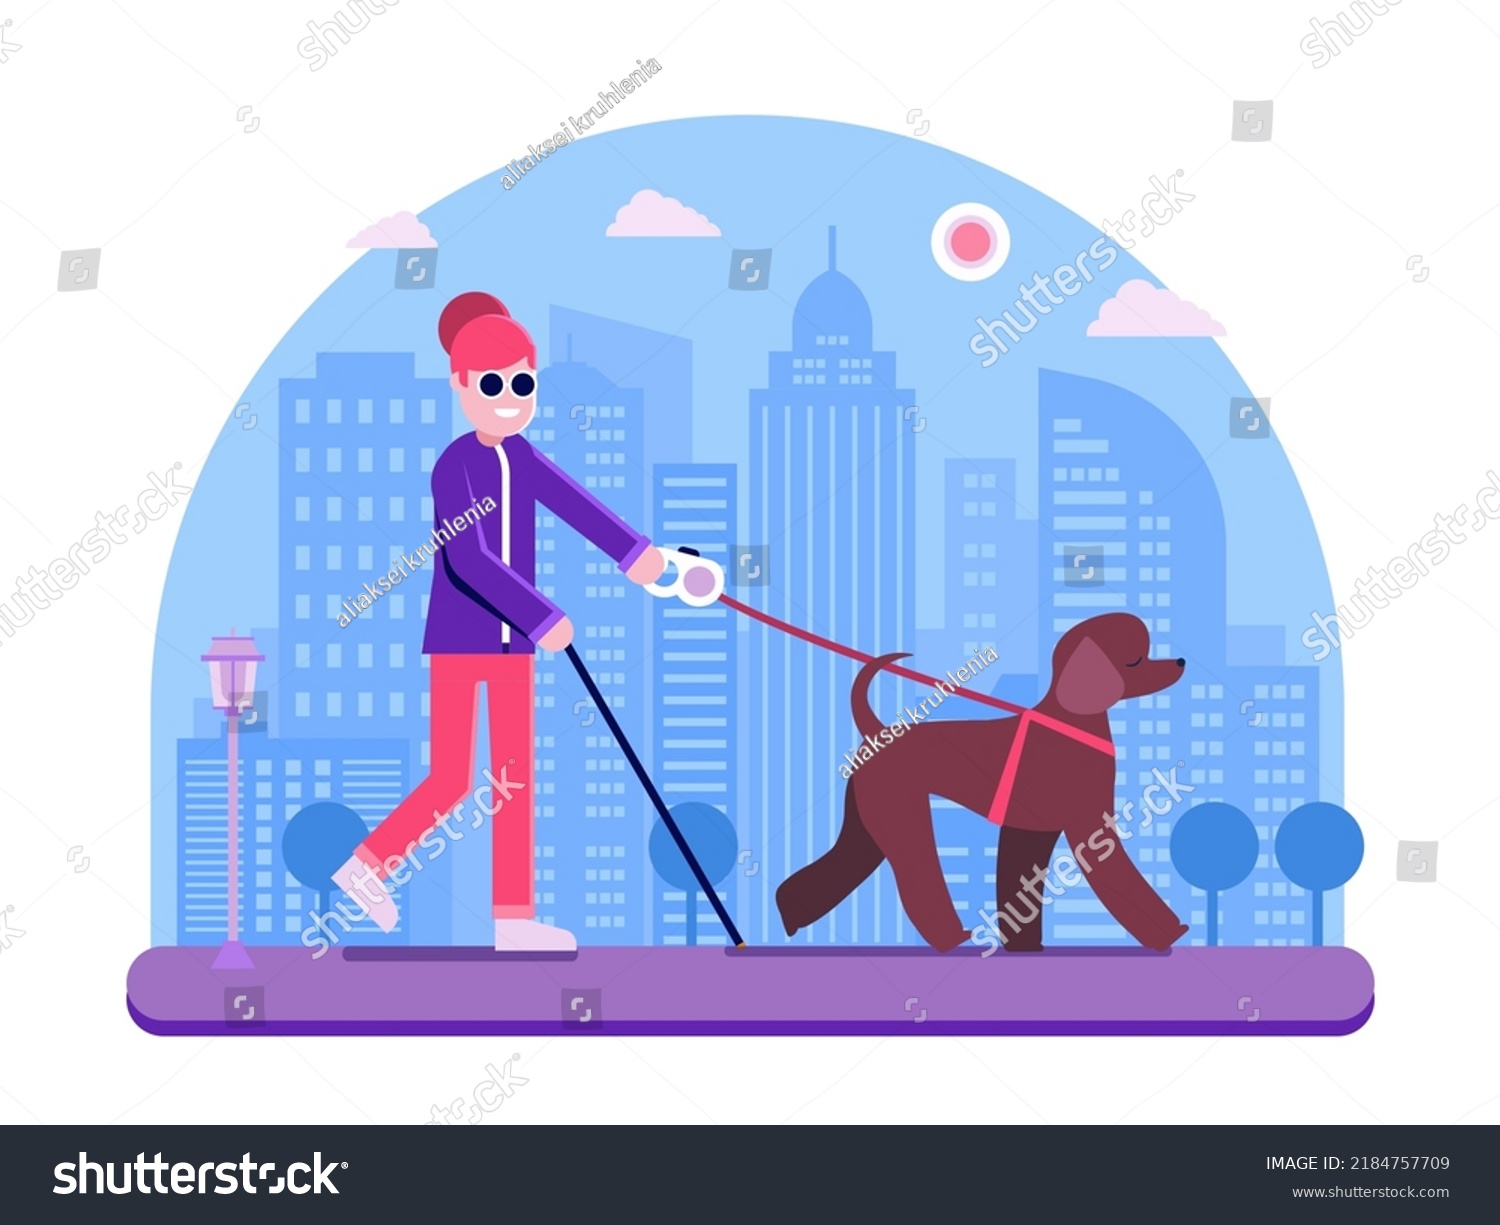 SVG of Blind woman walking with guide dog in city. Brown poodle leading blind lady across the street. Cheerful girl with cane and leader seeing eye dog strolls across street with skyscrapers. svg